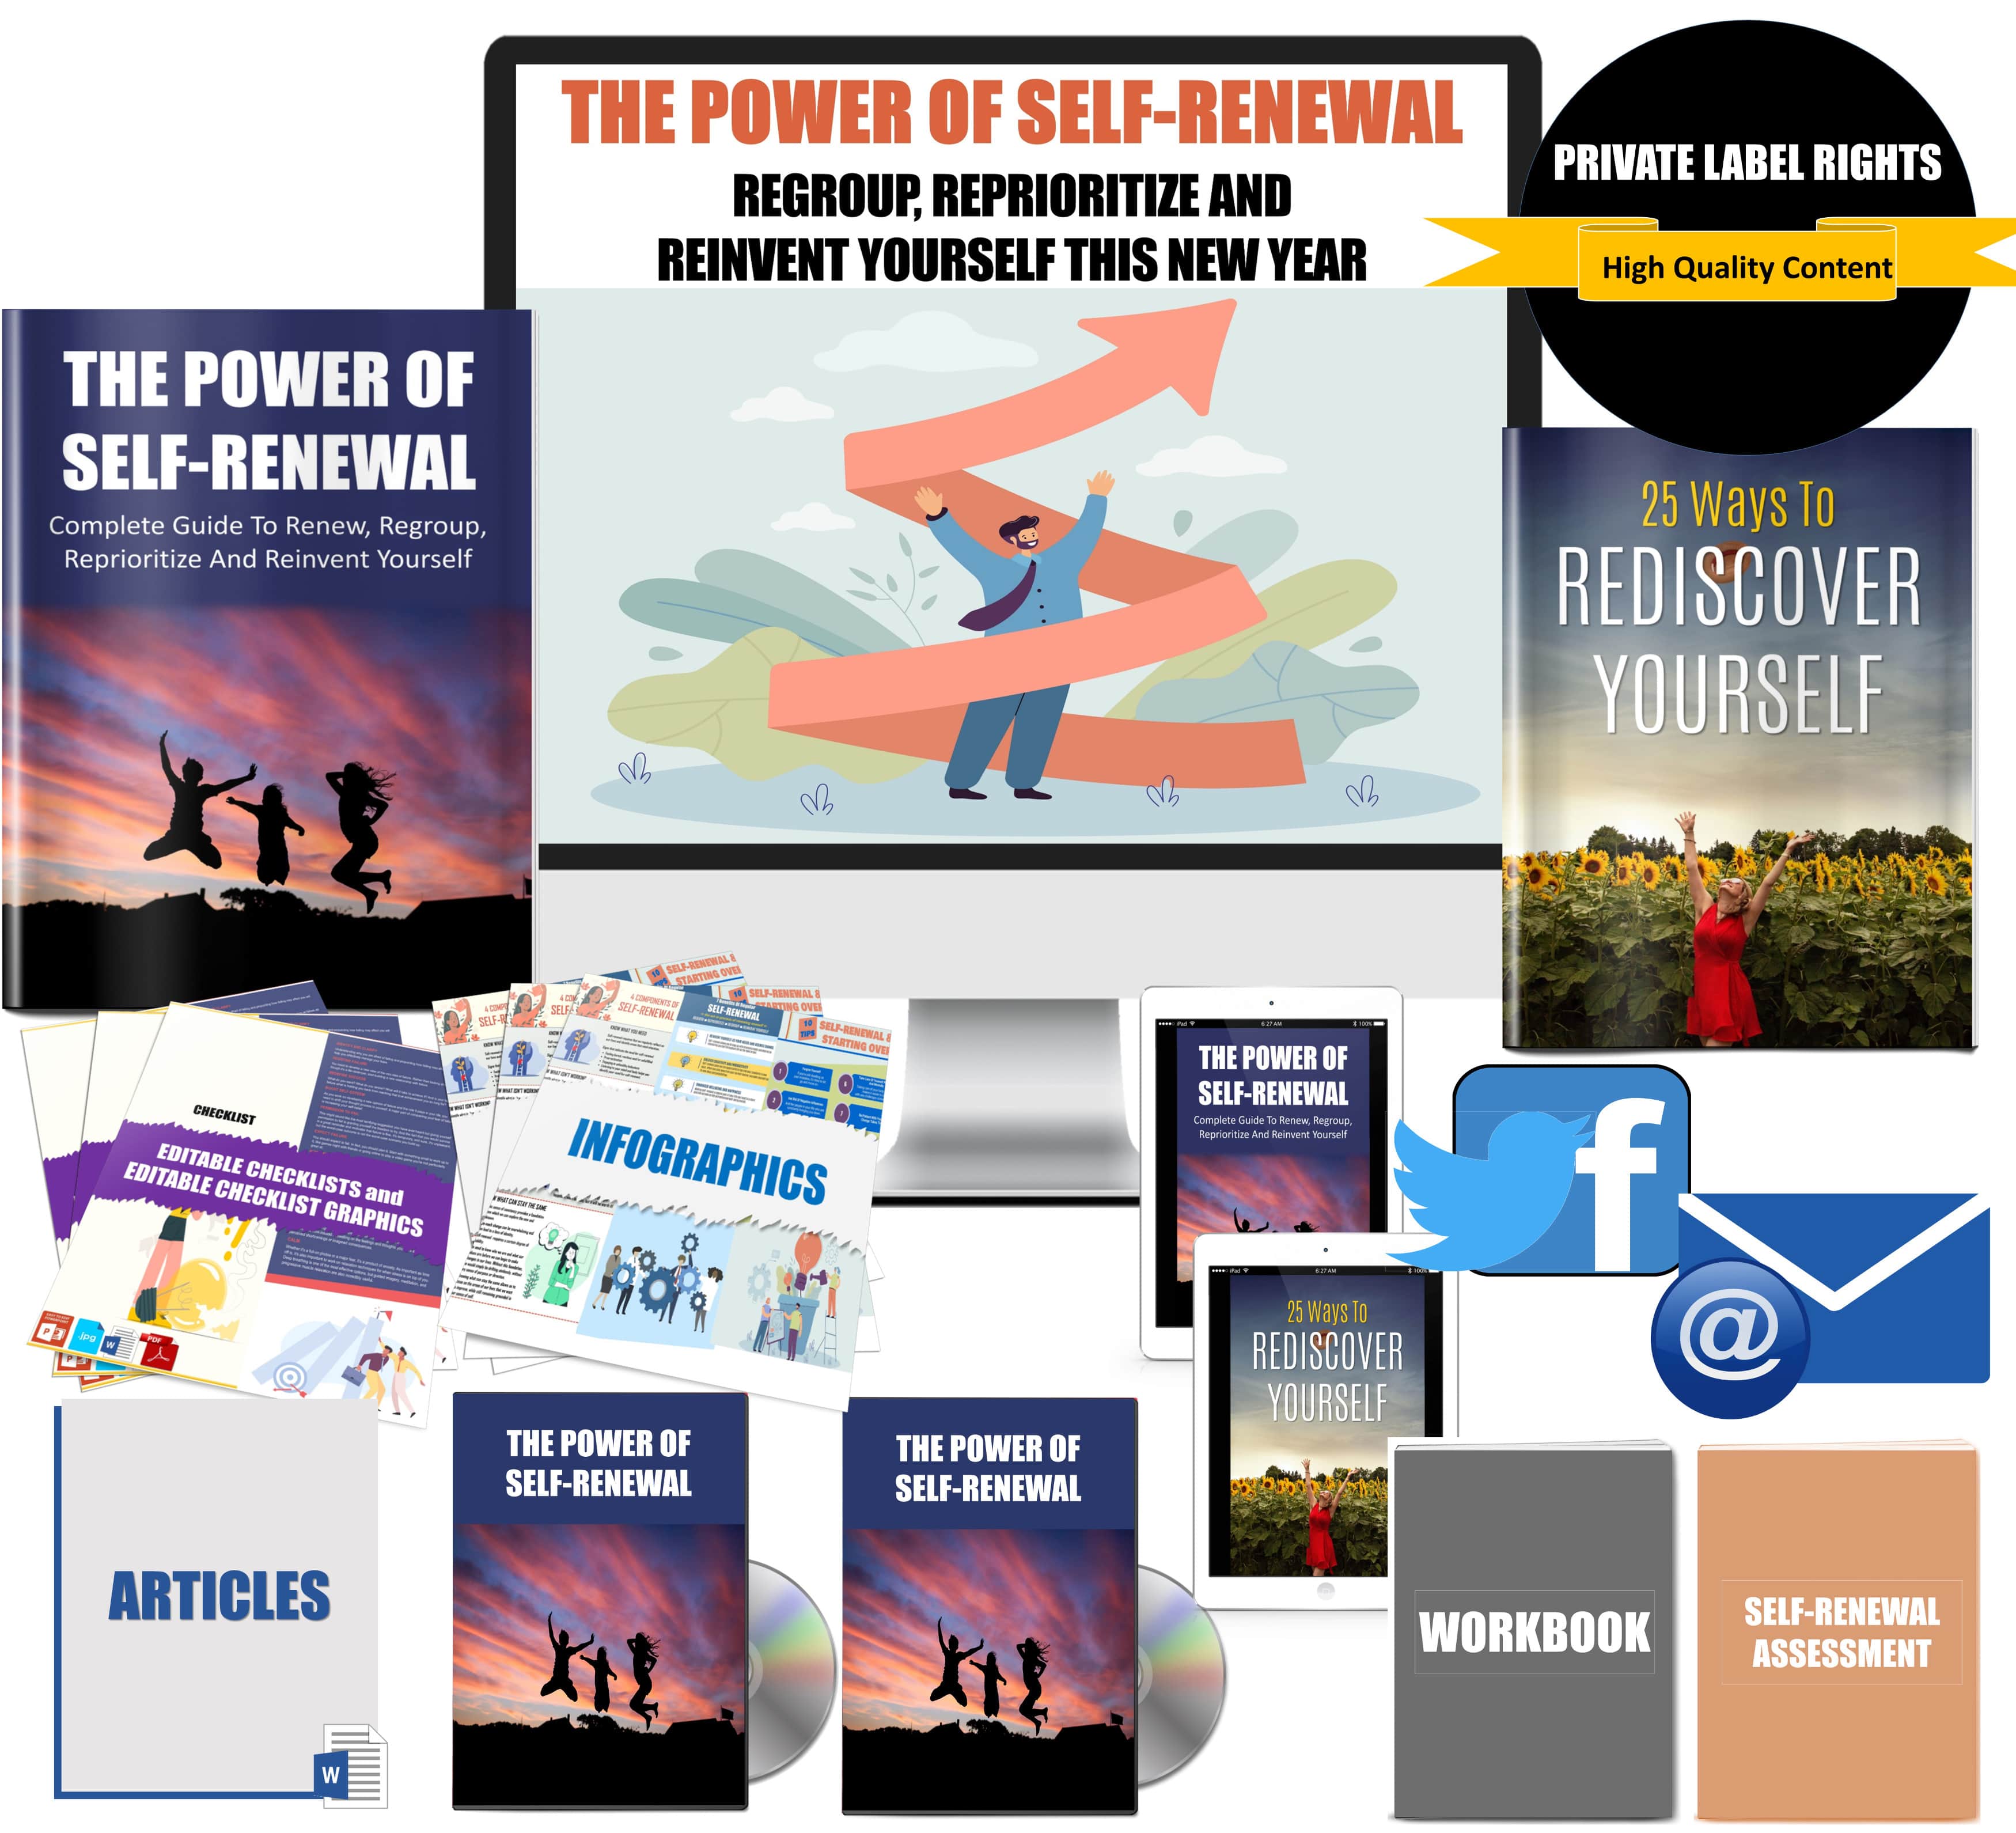 The Power Of Self-Renewal: Regroup, Reprioritize And Reinvent Yourself This New Year Giant Content Pack PLR Rights